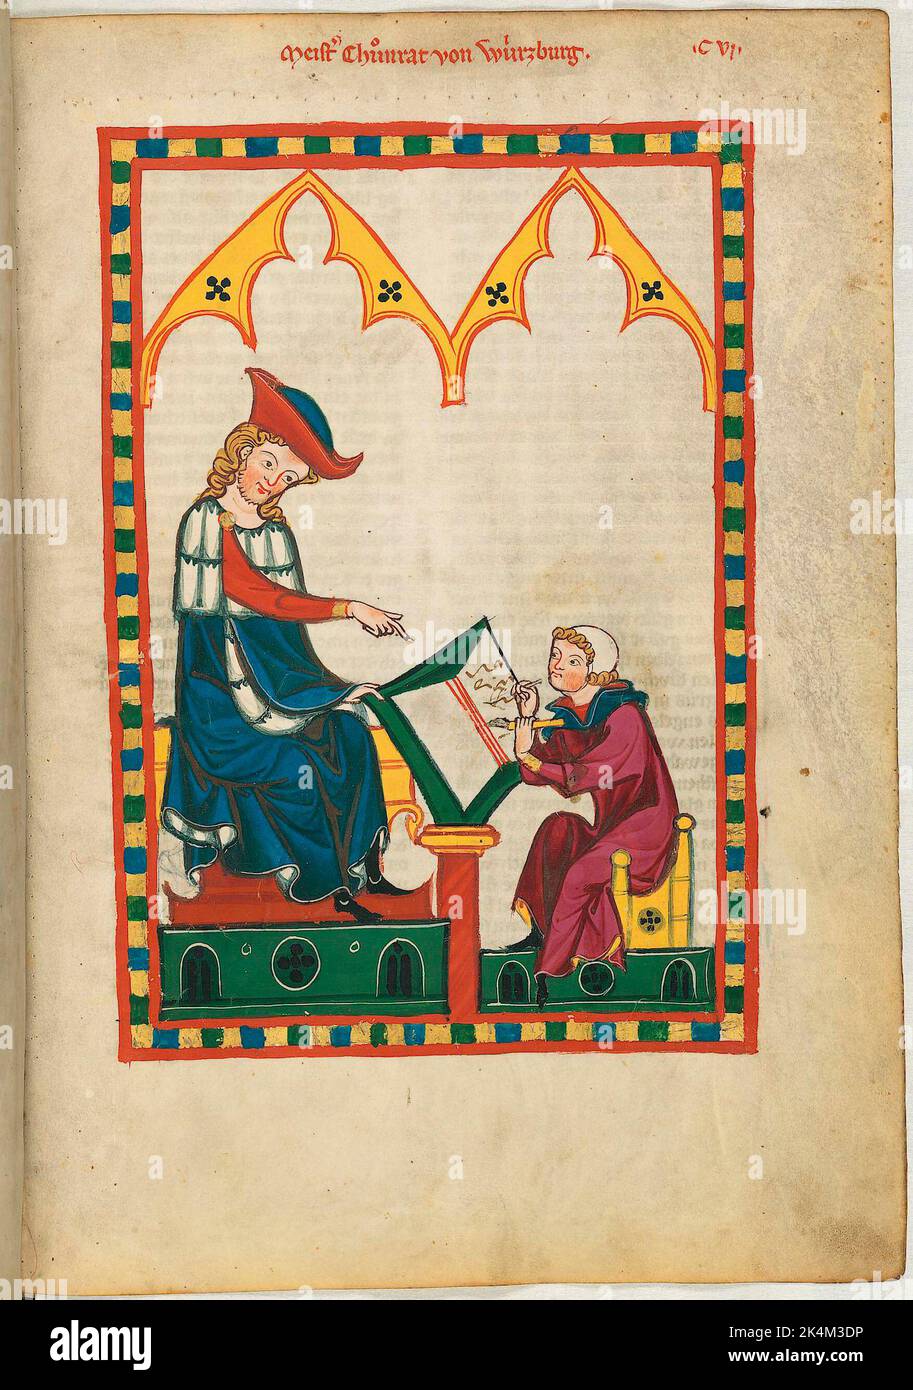 The 'Codex Manesse', also known as the 'Great Heidelberg Book of Songs' (Cod. Pal. germ. 848), was created between around 1300 and around 1340 in Zurich and is the most comprehensive collection of ballads and epigrammatic poetry in Middle High German language.  It consists of 426 parchments leaves, each 35,5 x 25 cm, double-sided, pagination added in a later scribe's hand. In addition the codex includes 140 blank pages and numerous pages partially blank. Great Heidelberg Book of Songs. Grosse Heidelberger Liederhandschrift. Codex Manesse. Illuminated manuscript, Medieval art.  Heidelberg, Univ Stock Photo